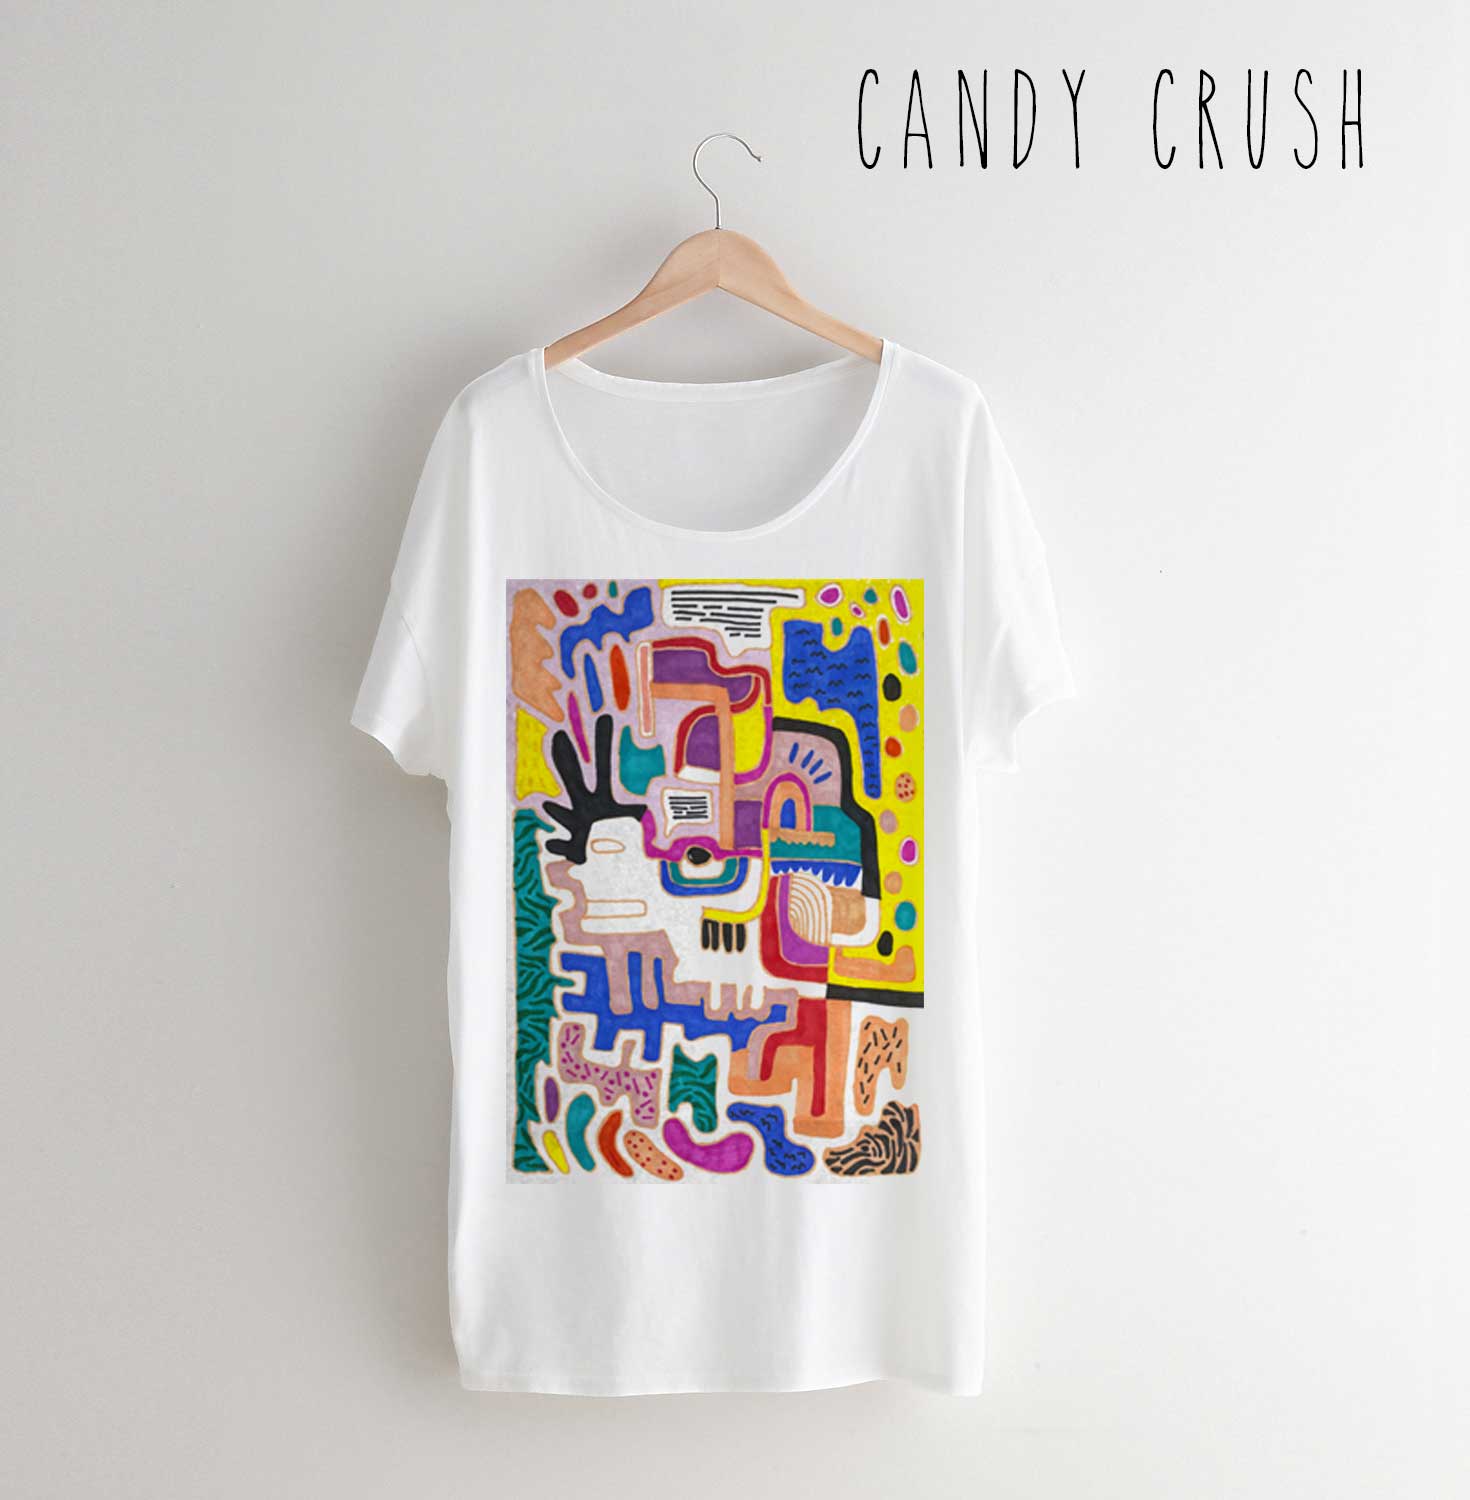 CANDY-Crush-t-shirt-fashion-style-trend-design-art-cool-drawing-freelance-textile-vasare-nar-designer-colourful